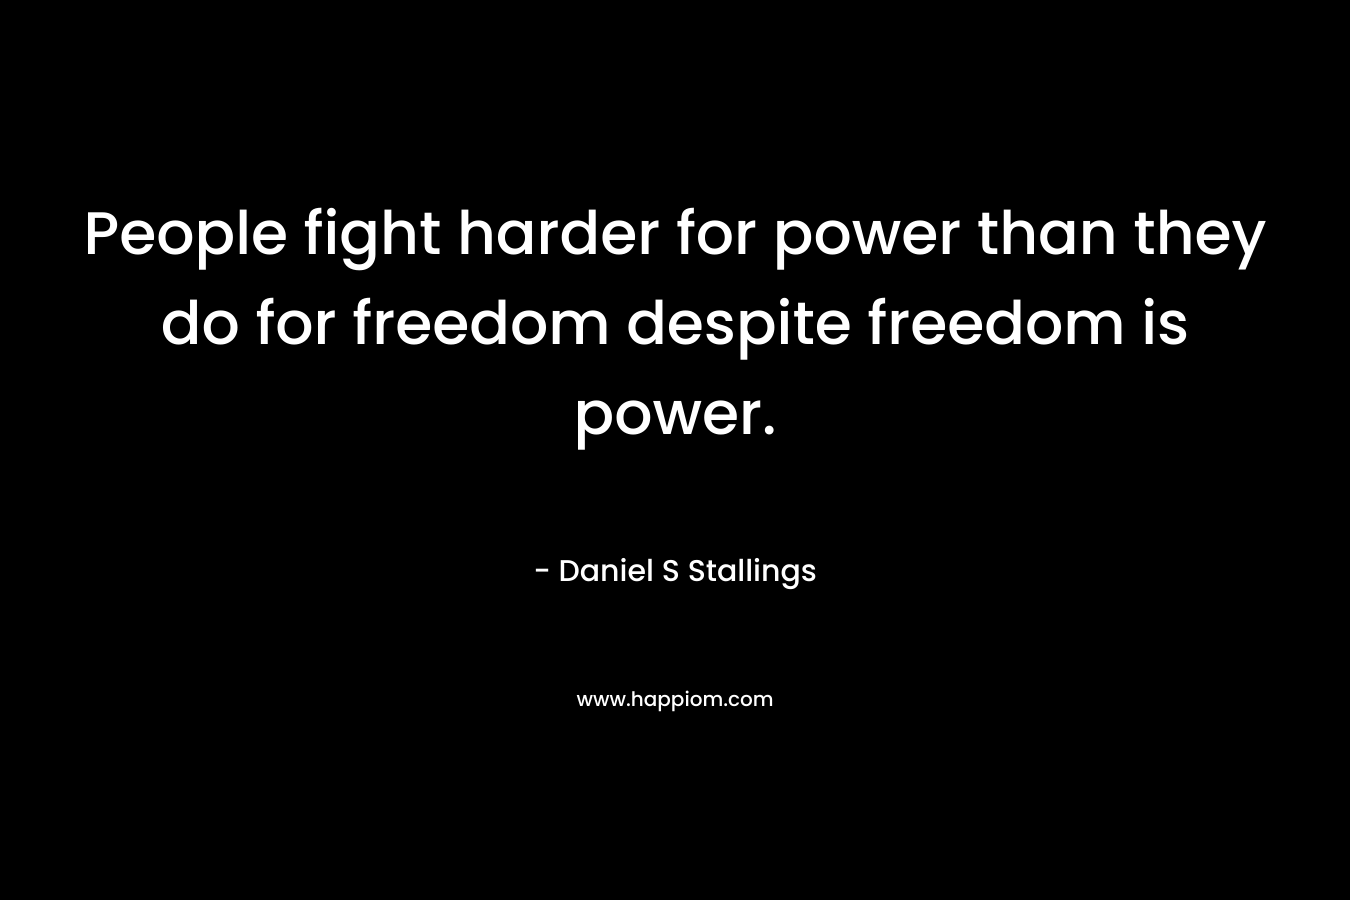 People fight harder for power than they do for freedom despite freedom is power.